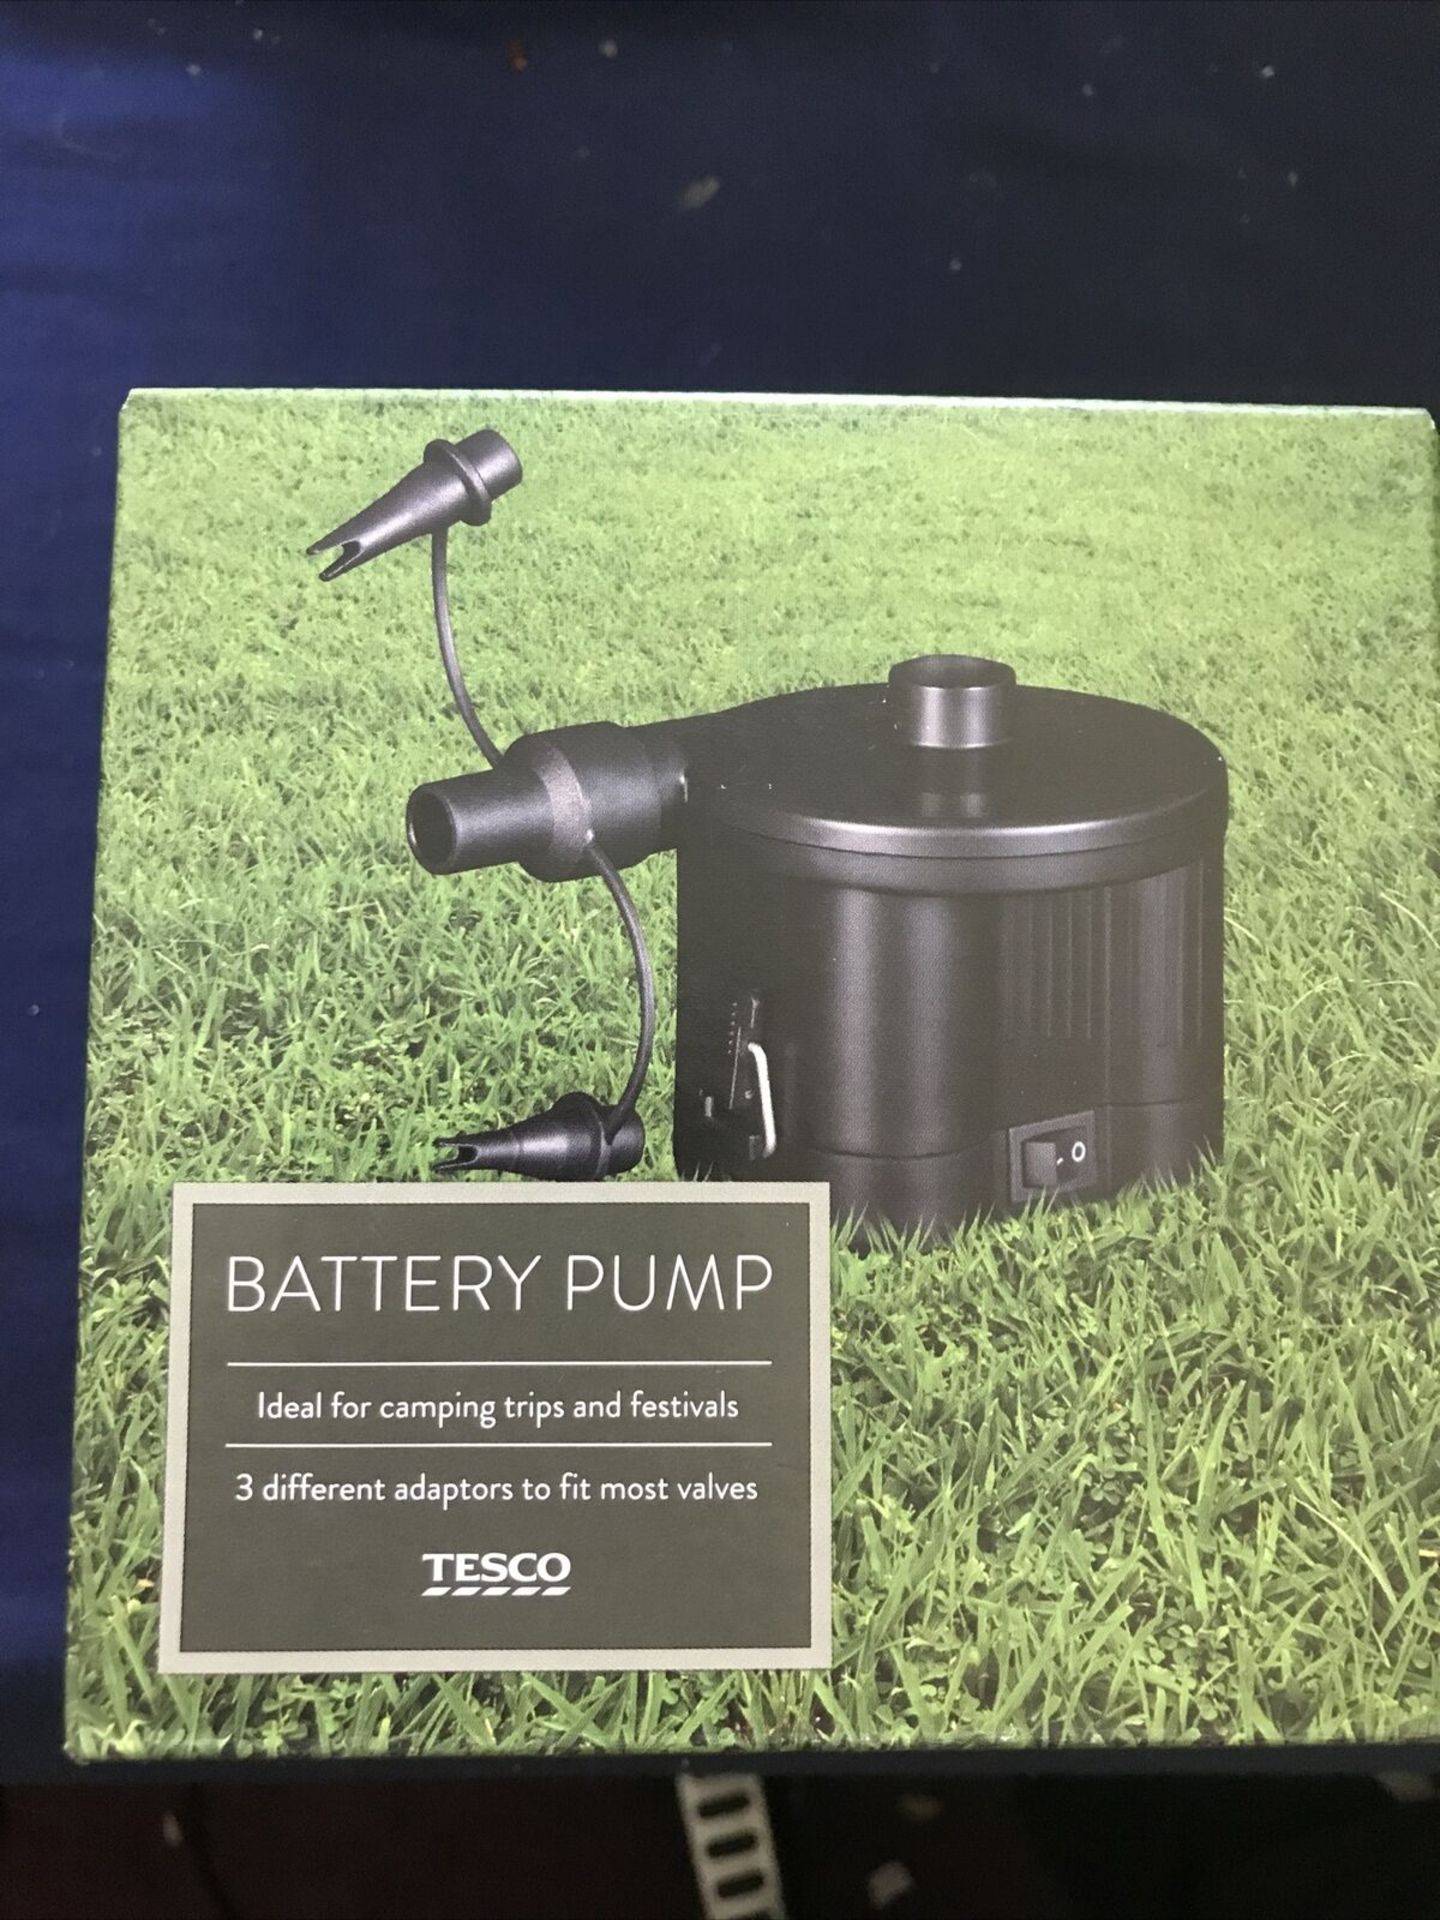 PALLET TO CONTAIN 72 X NEW BOXED TESCO BATTERY PUMPS. IDEAL FOR CAMPING, TRIPS AND FESTIVALS. 3